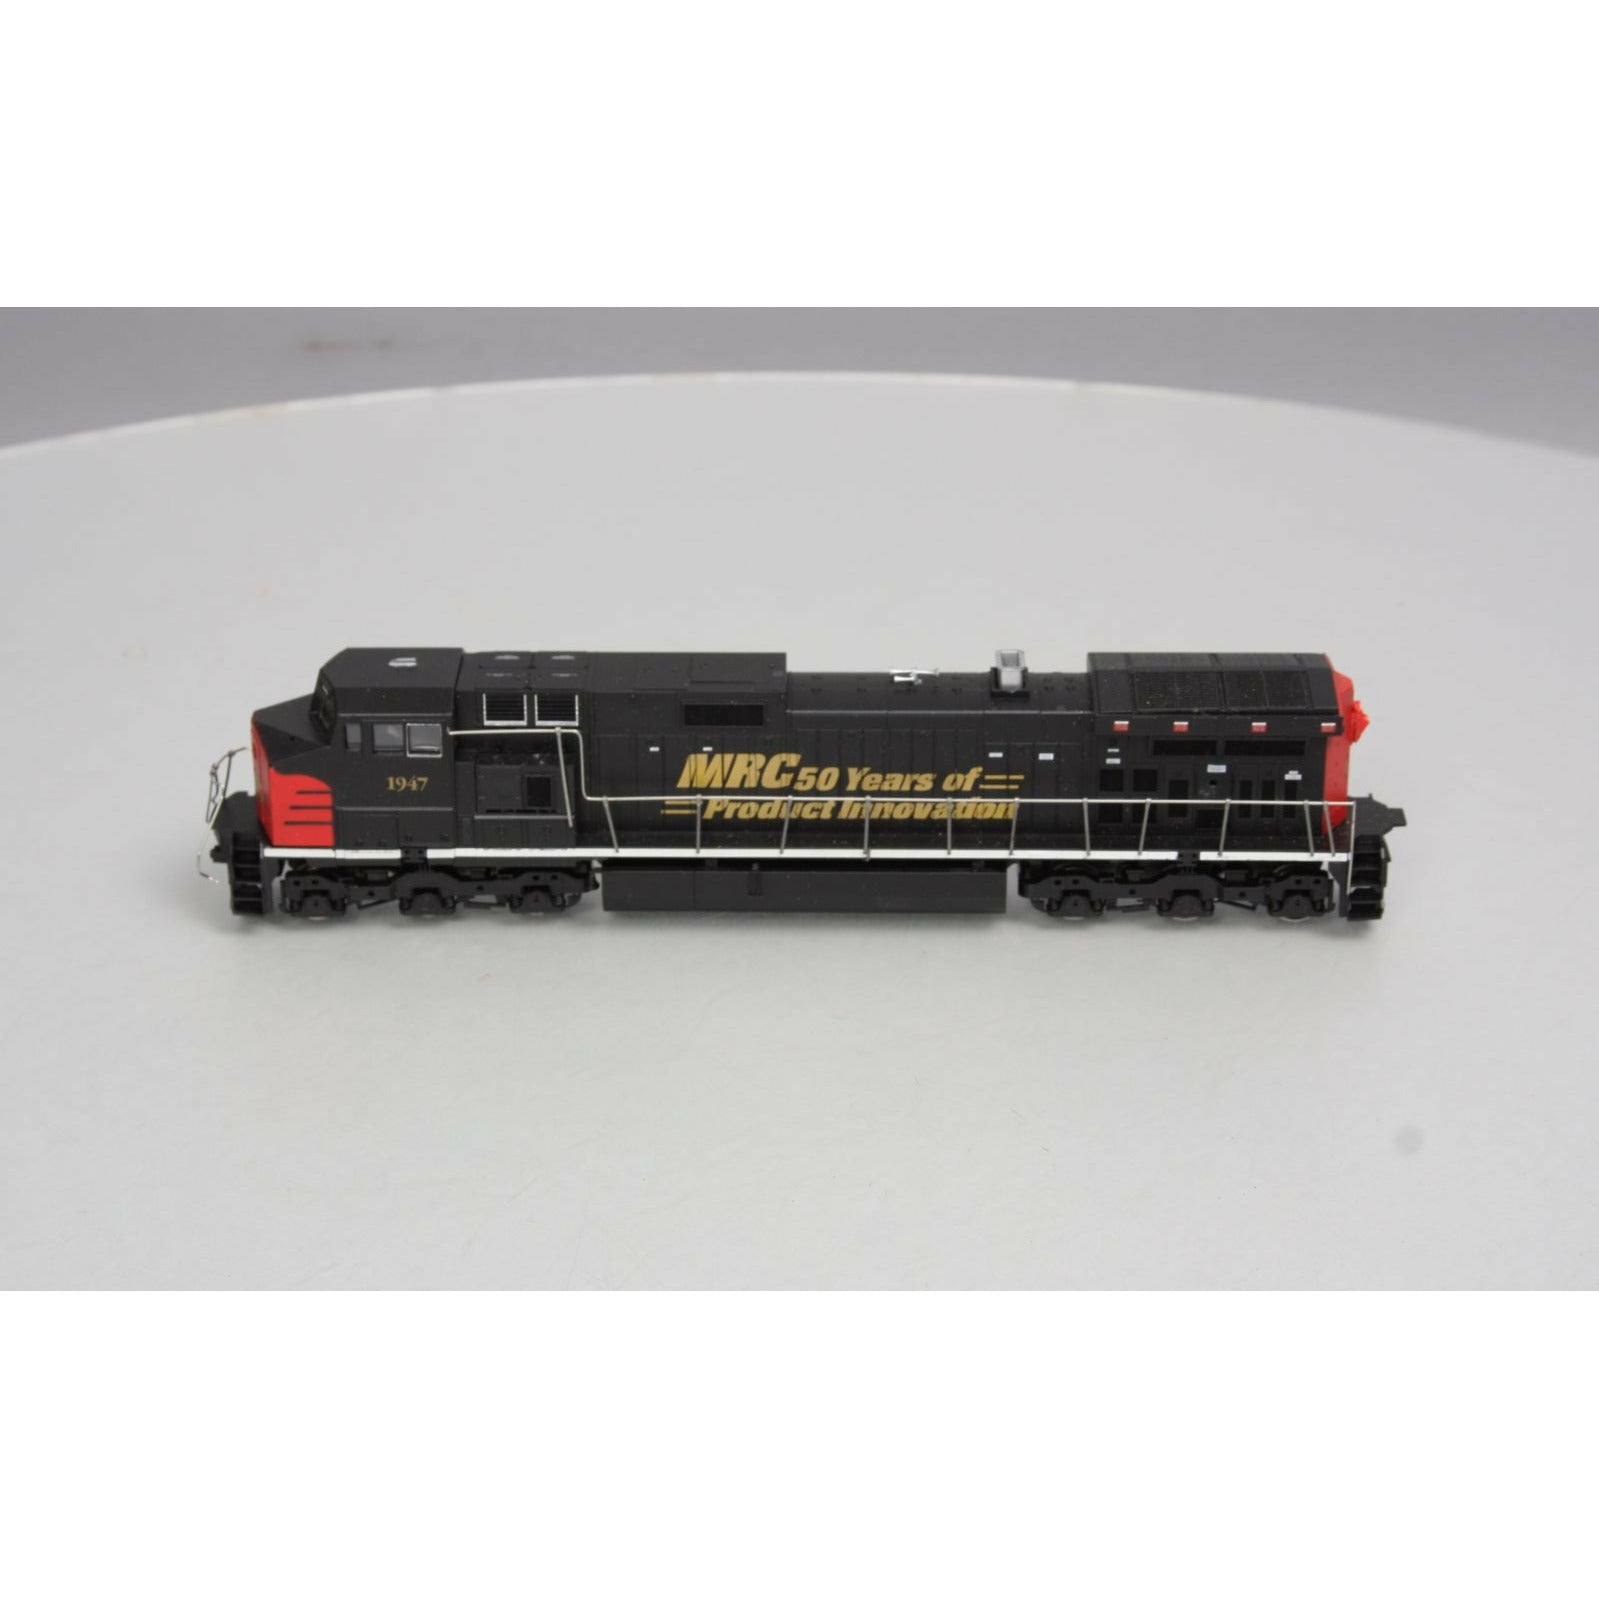 HO Scale Limited Edition Dash 9 Locomotive 50 Years of Product Innovation